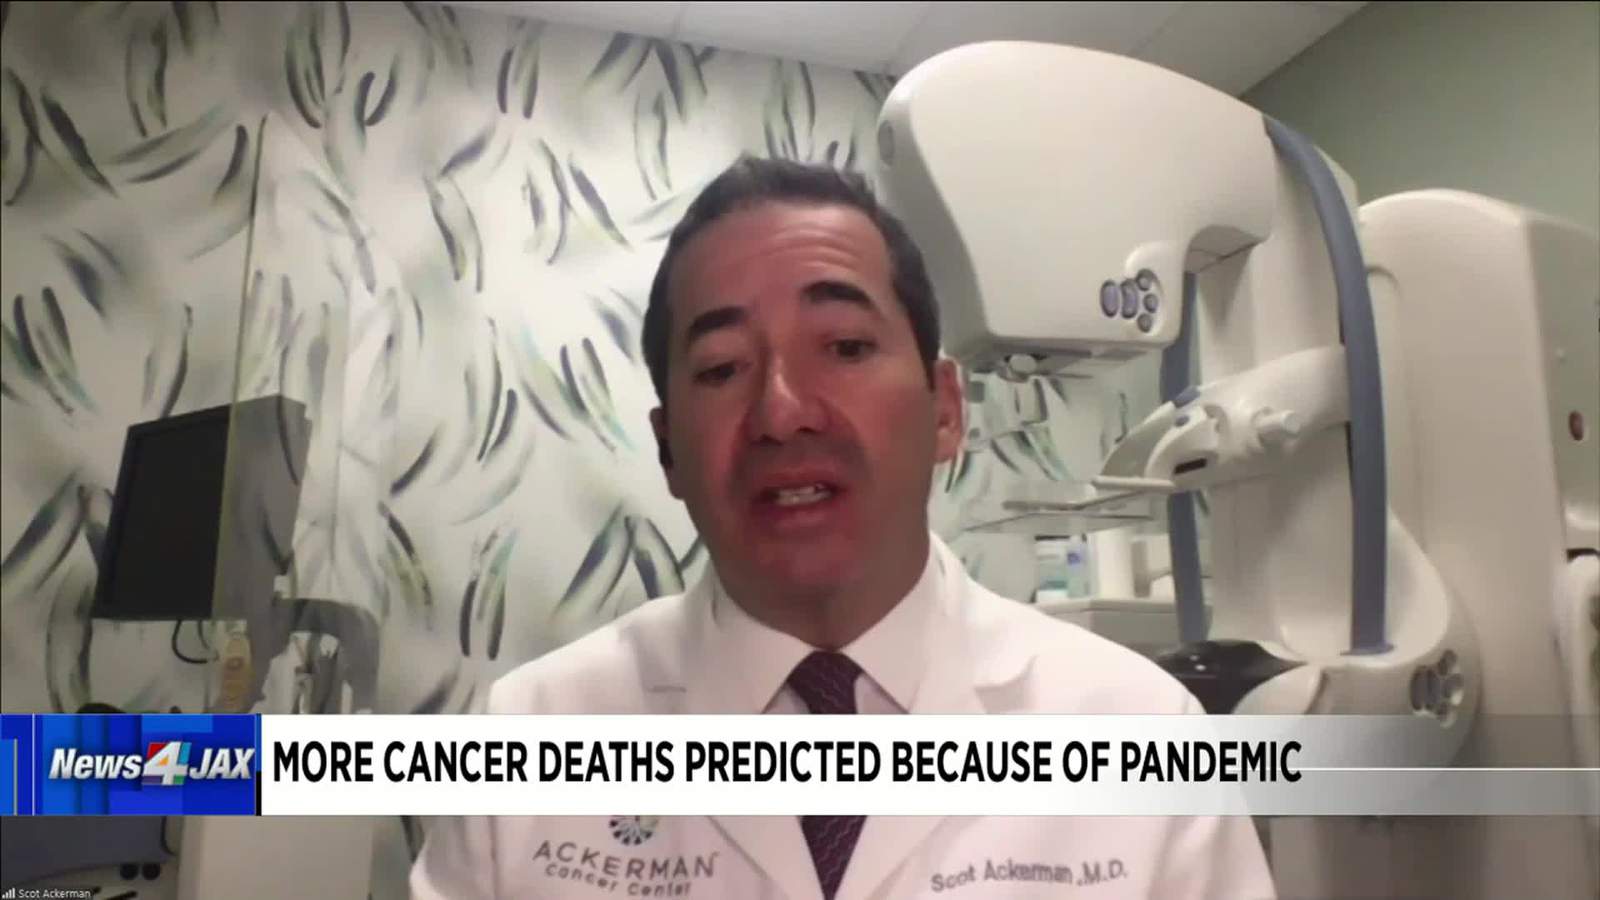 More cancer deaths predicted because of pandemic